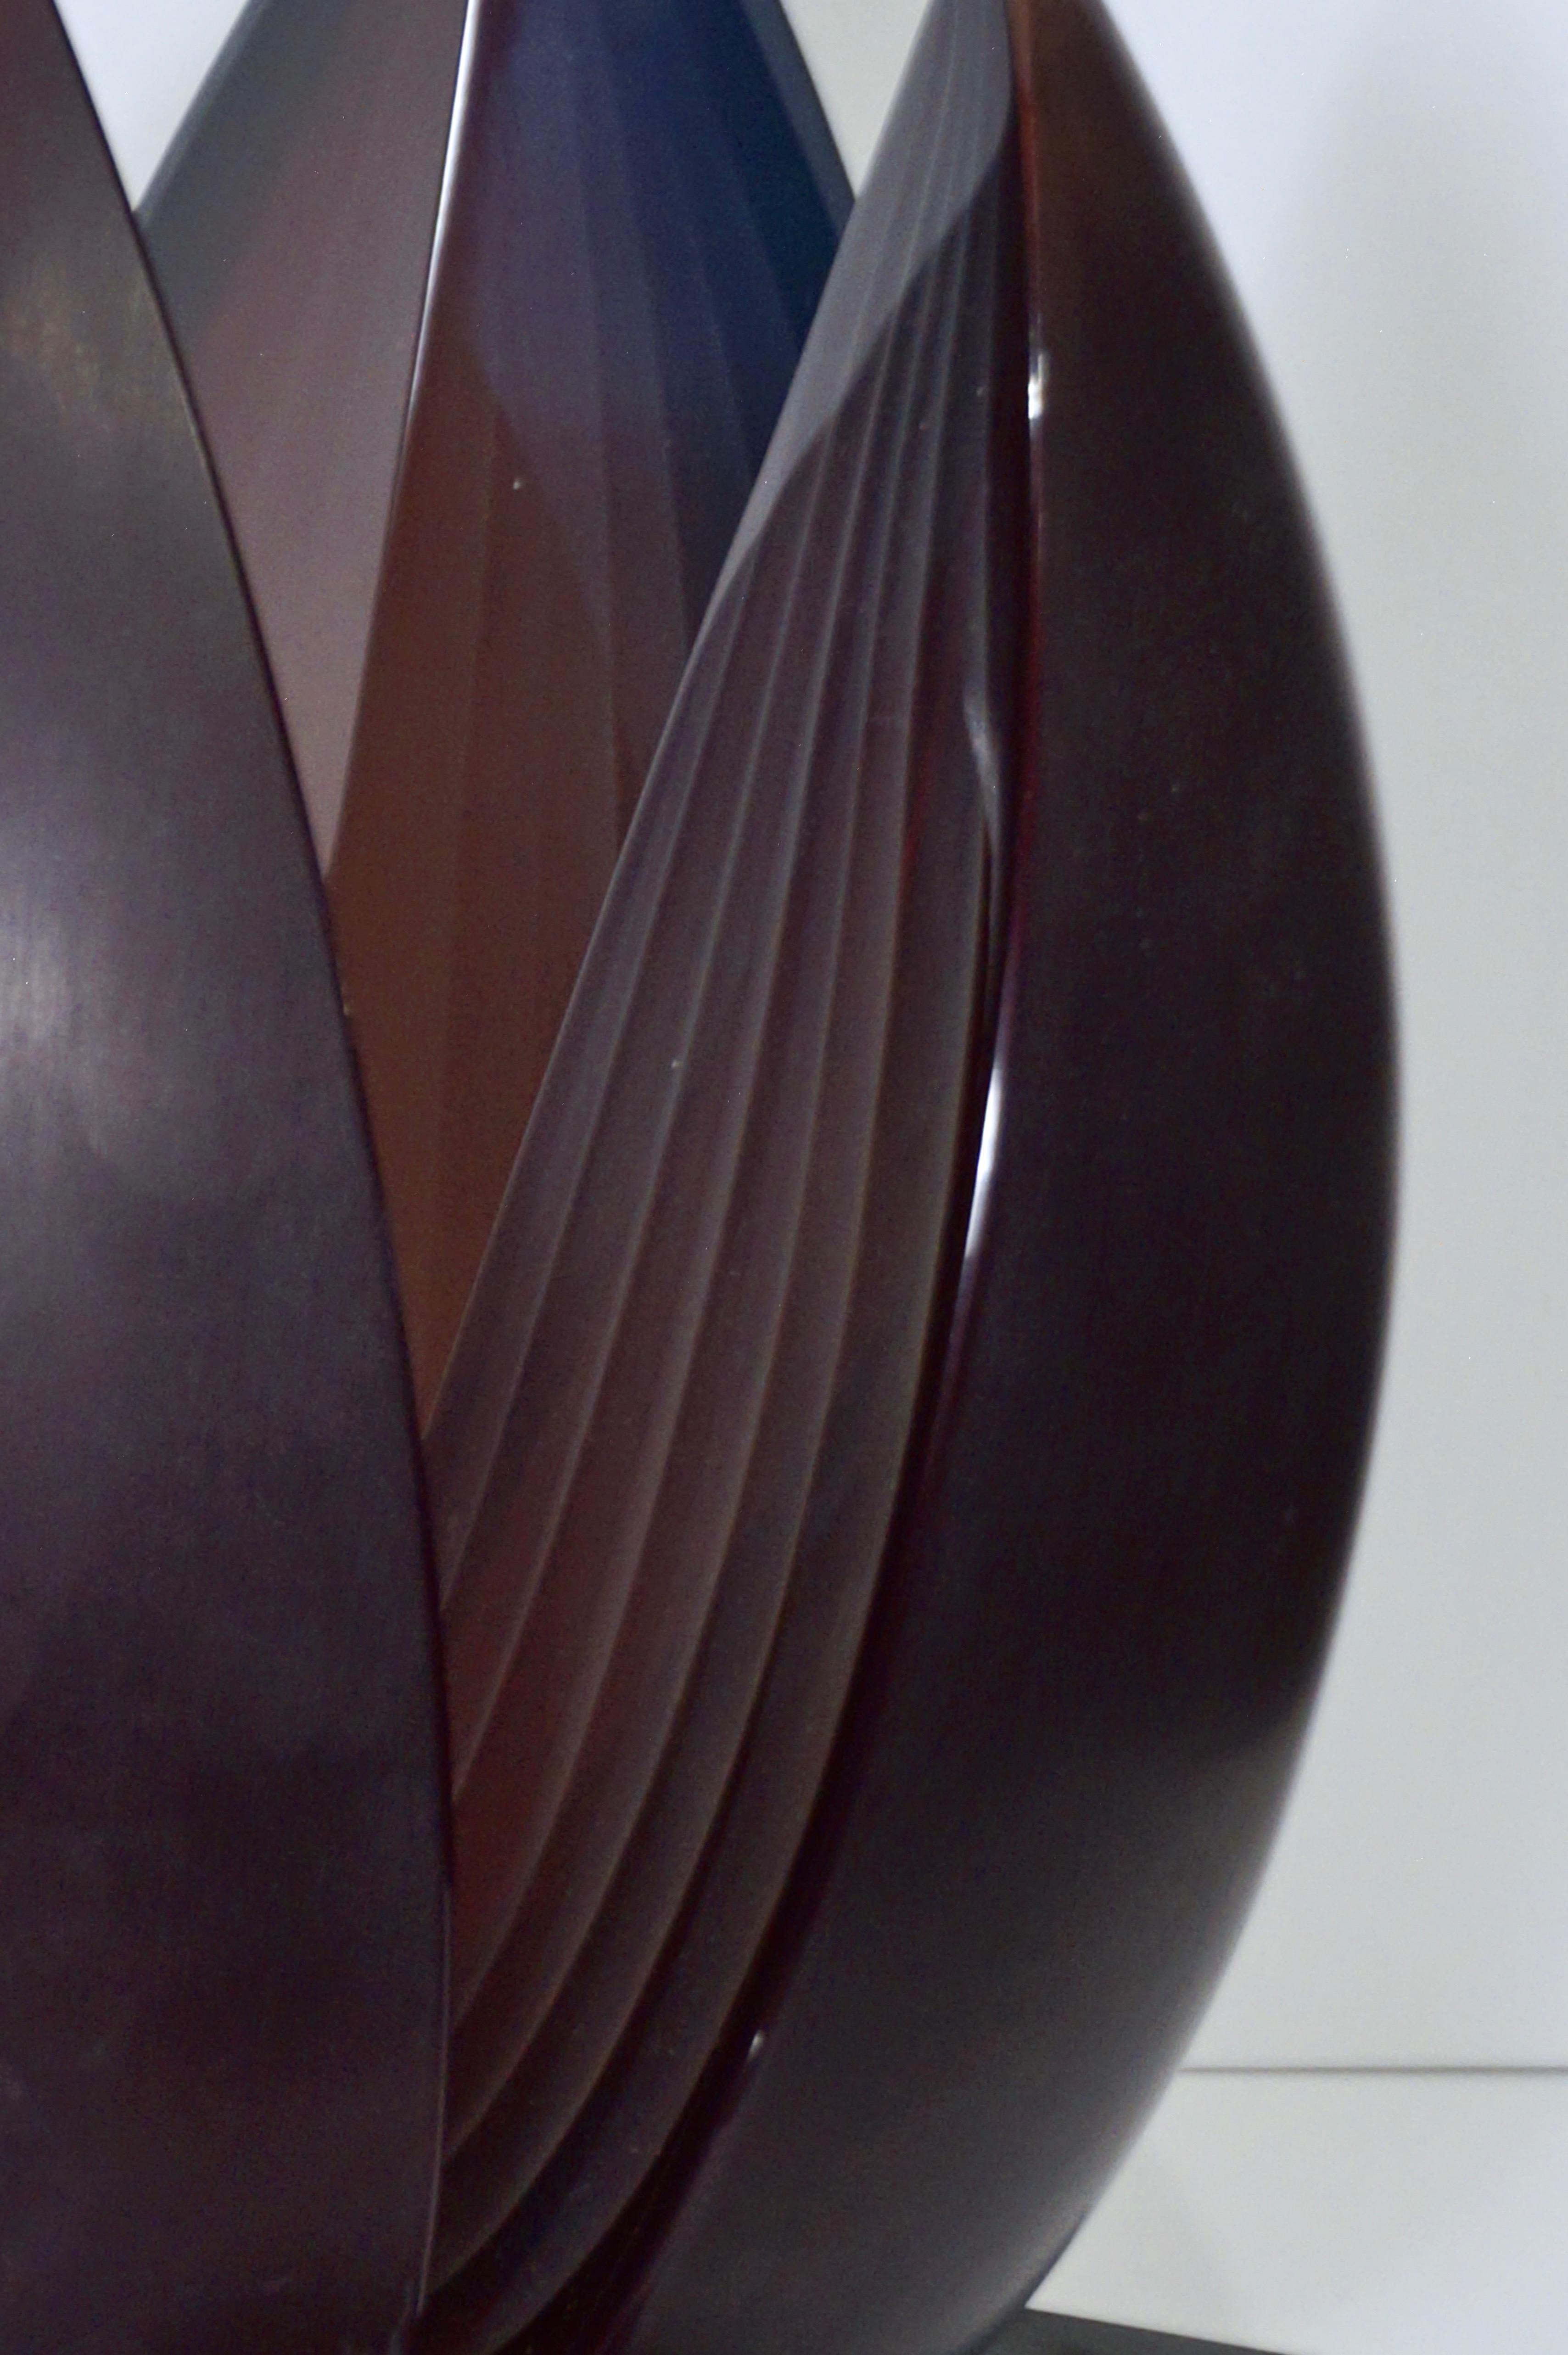 A. Barbaro Abstract Flower Sculpture in a Dark Plum Murano Glass on Slate Base 3